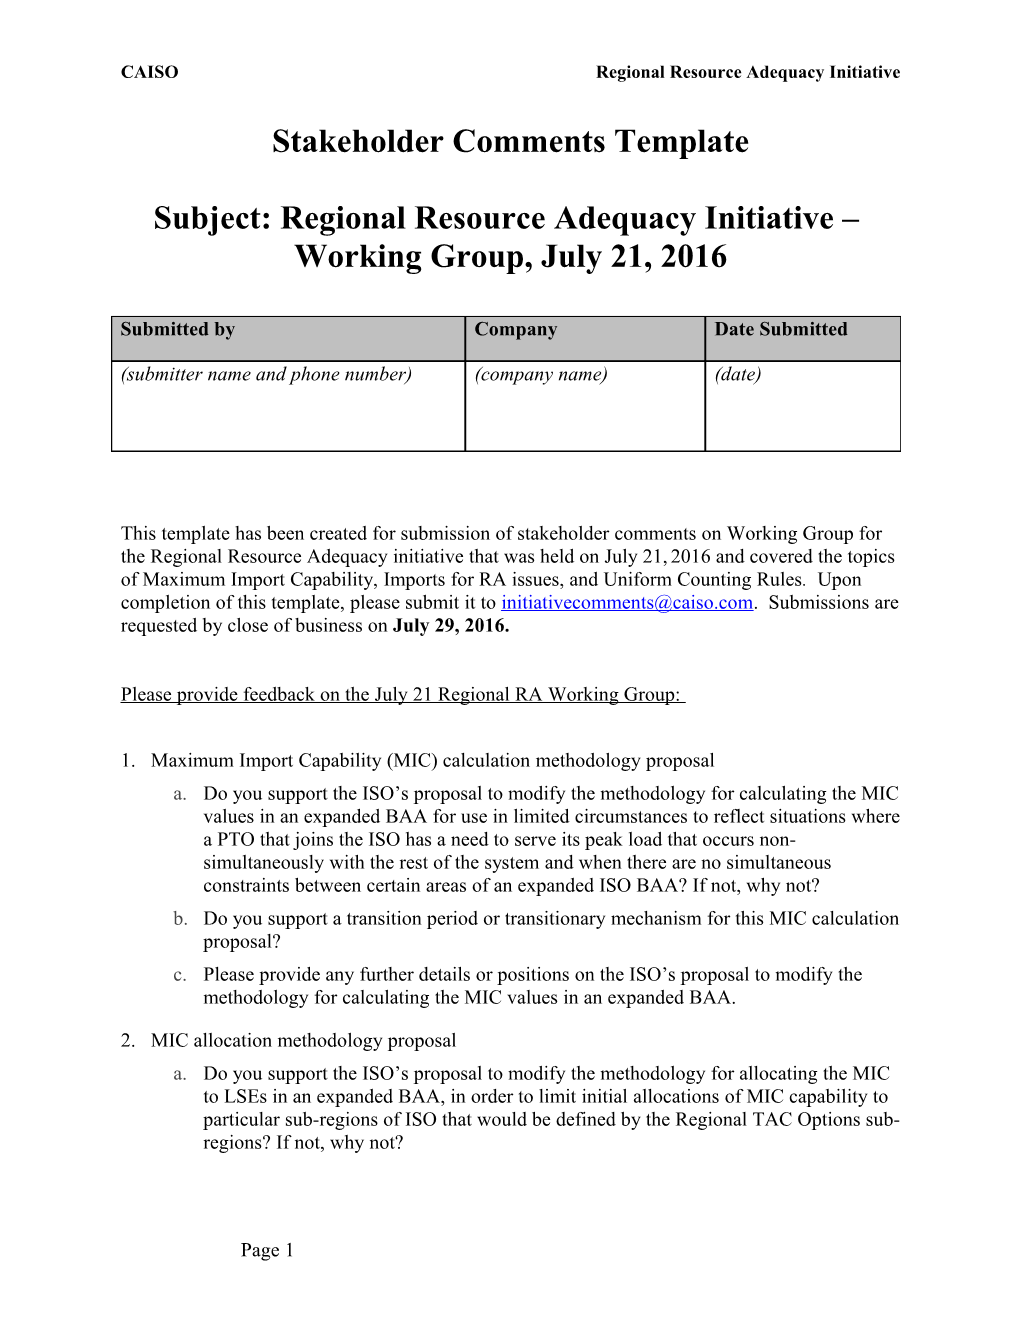 Stakeholder Comments Template - Regional Resource Adequacy Working Group - Jul 20, 2016